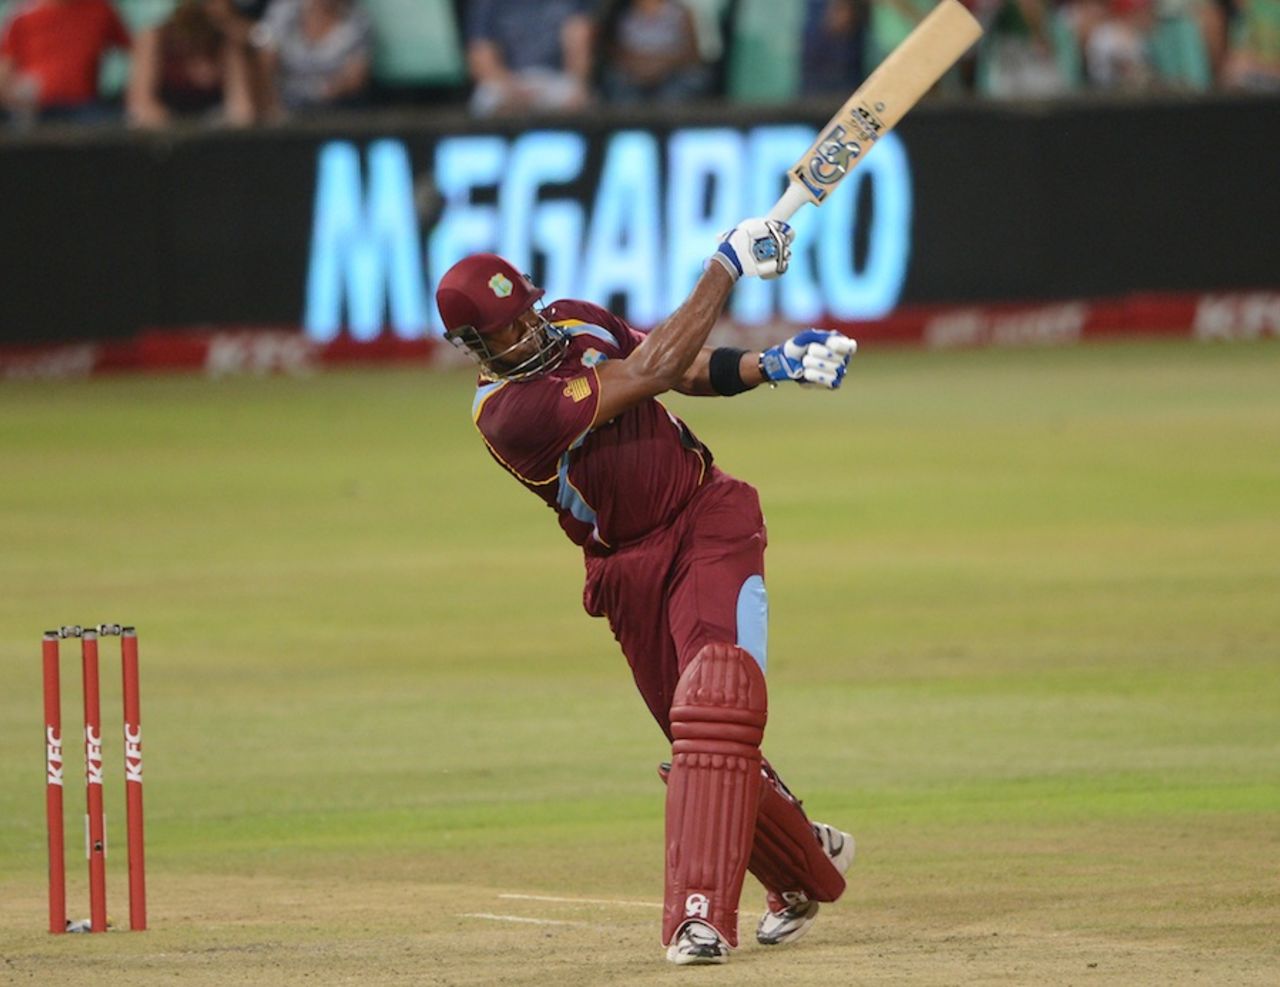 Kieron Pollard takes one hand off the bat as he hits, South Africa v West Indies, 3rd T20, Durban, January 14, 2015